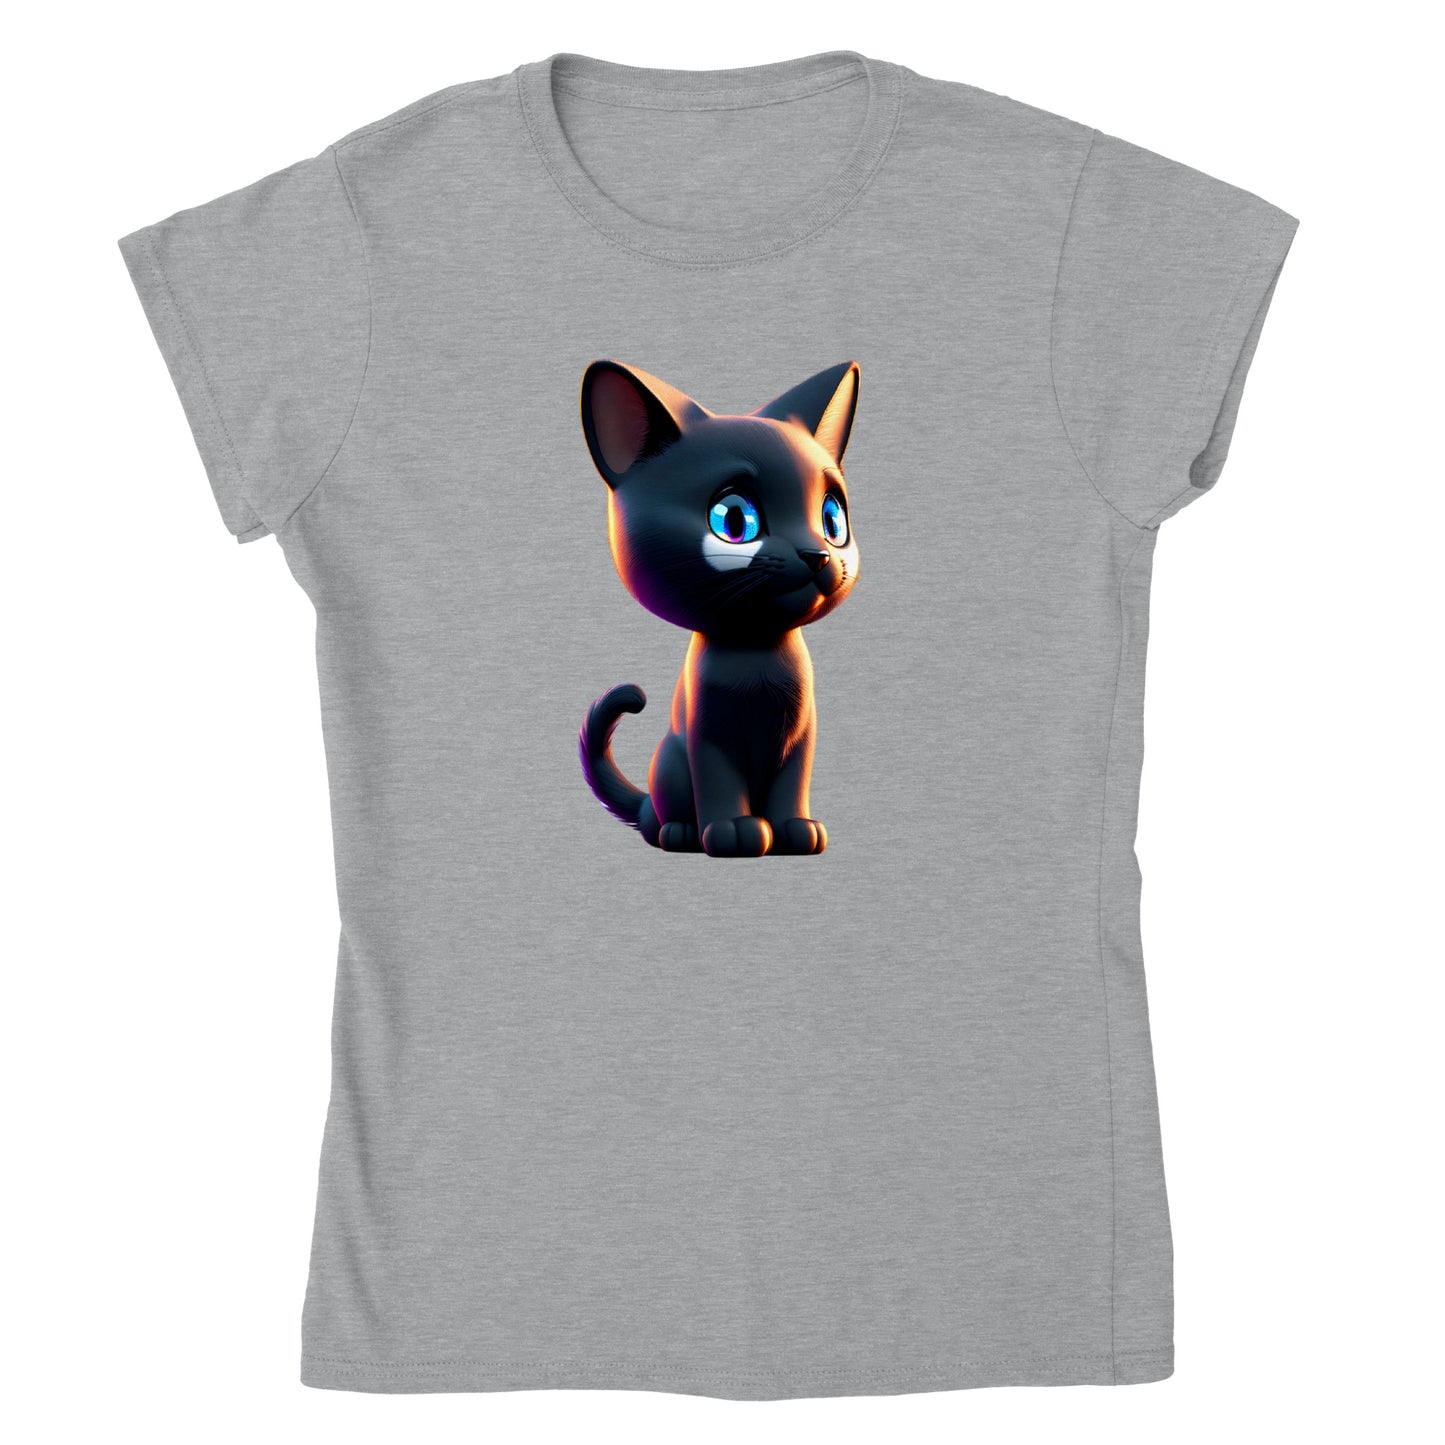 Adorable, Cool, Cute Cats and Kittens Toy - Classic Women’s Crewneck T-Shirt 66